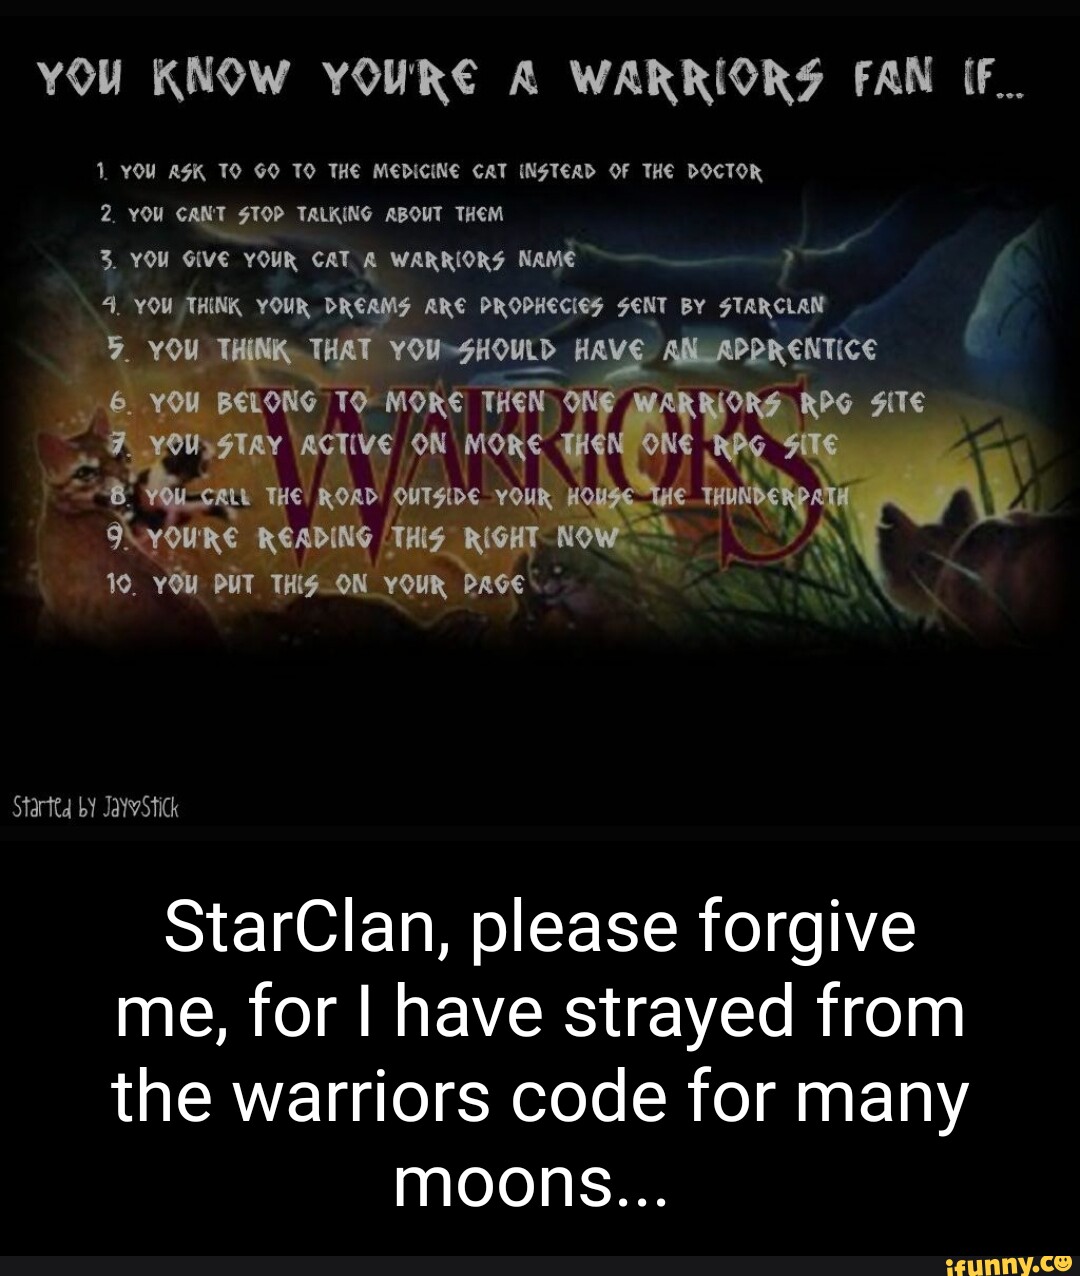 you MUST follow the warrior code if you are a warrior fan